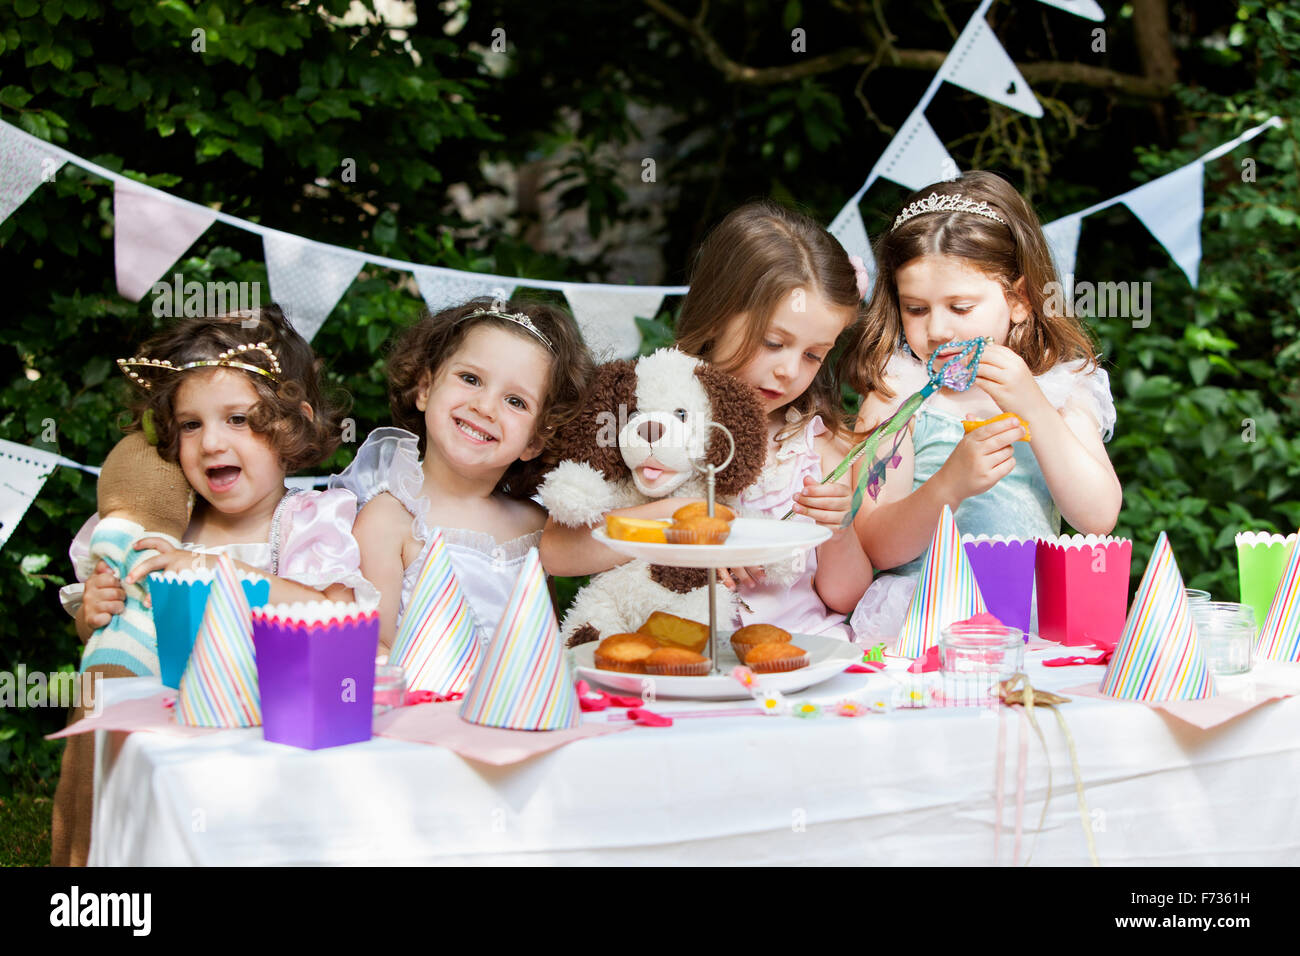 Group of young girls dressed up at a garden party. Stock Photo